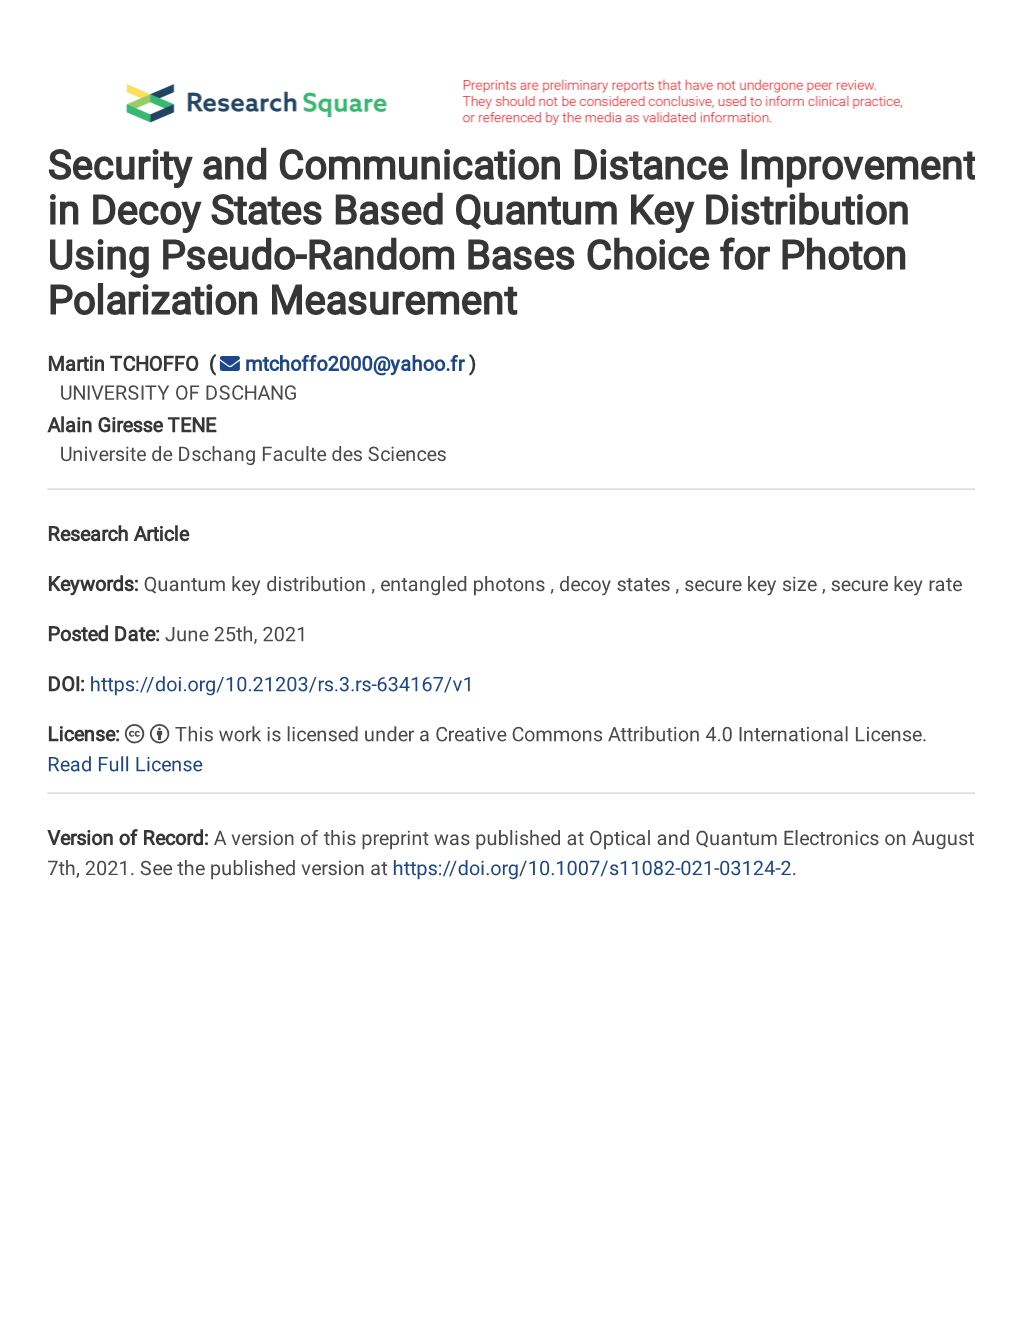 Security and Communication Distance Improvement in Decoy States Based Quantum Key Distribution Using Pseudo-Random Bases Choice for Photon Polarization Measurement